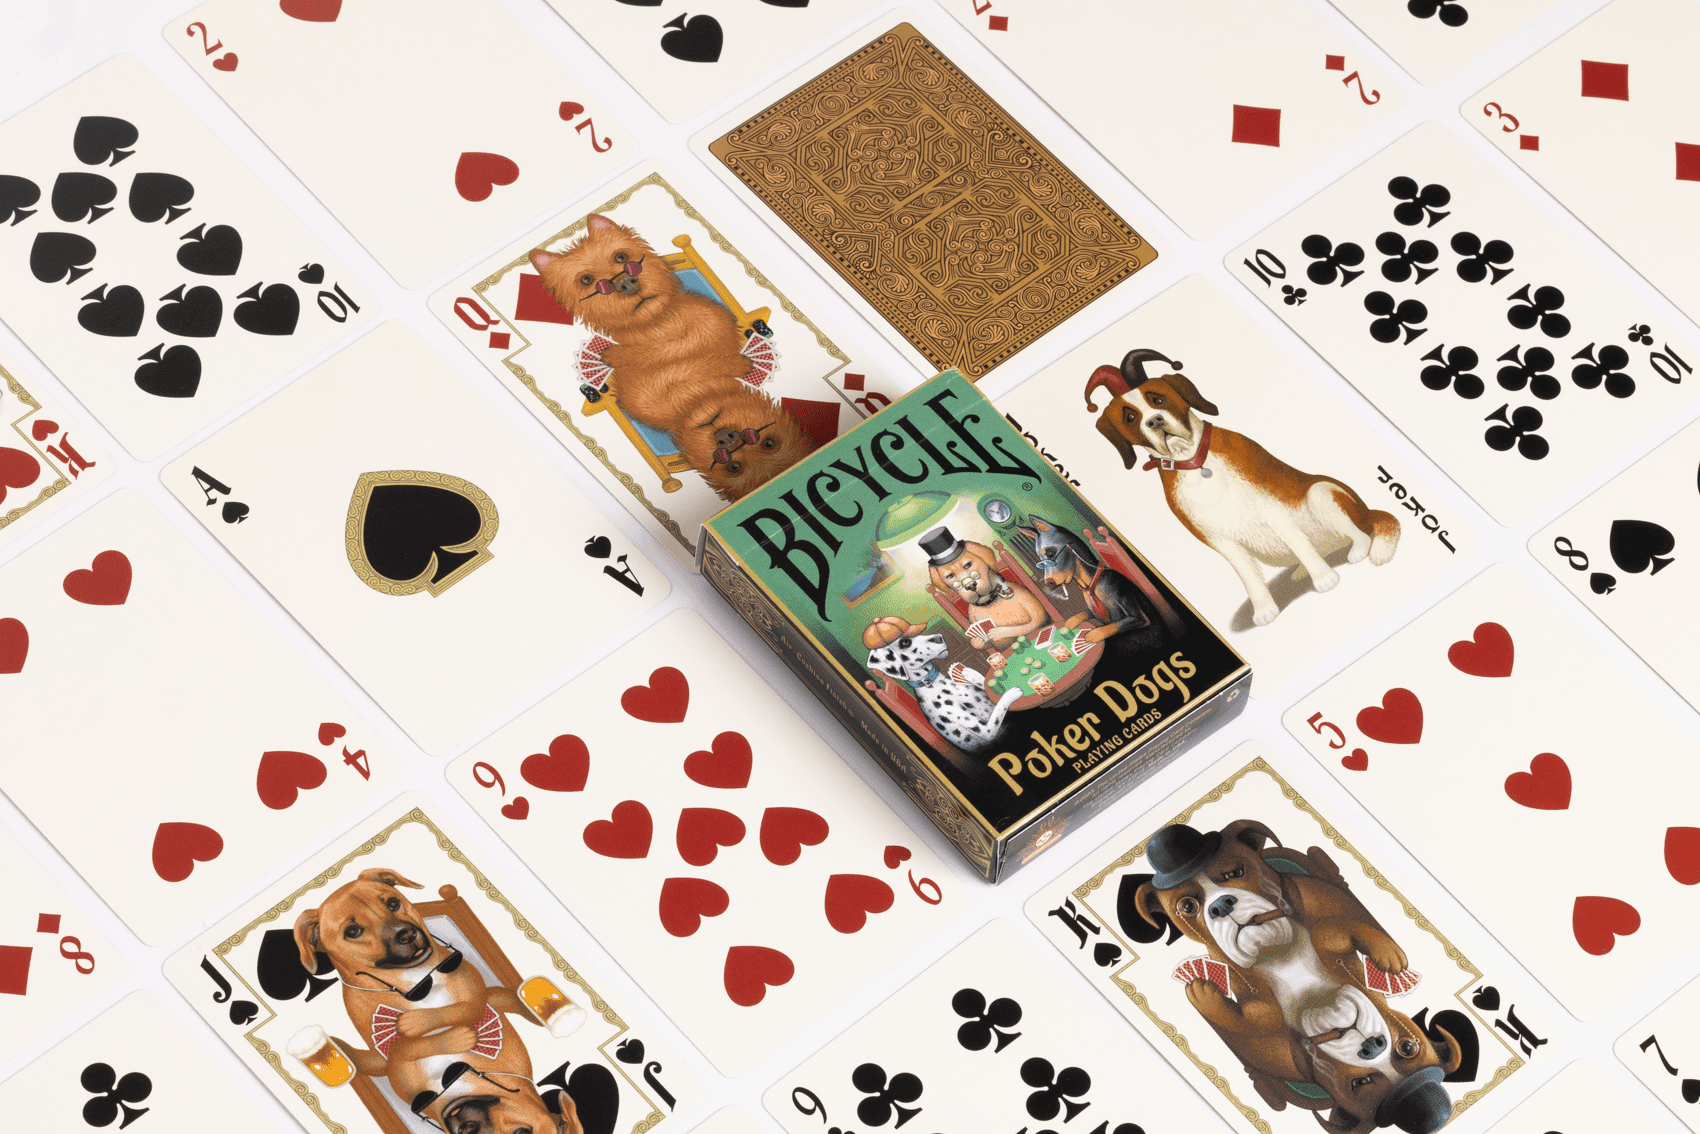 PlayingCardDecks.com-Poker Dogs Bicycle Playing Cards